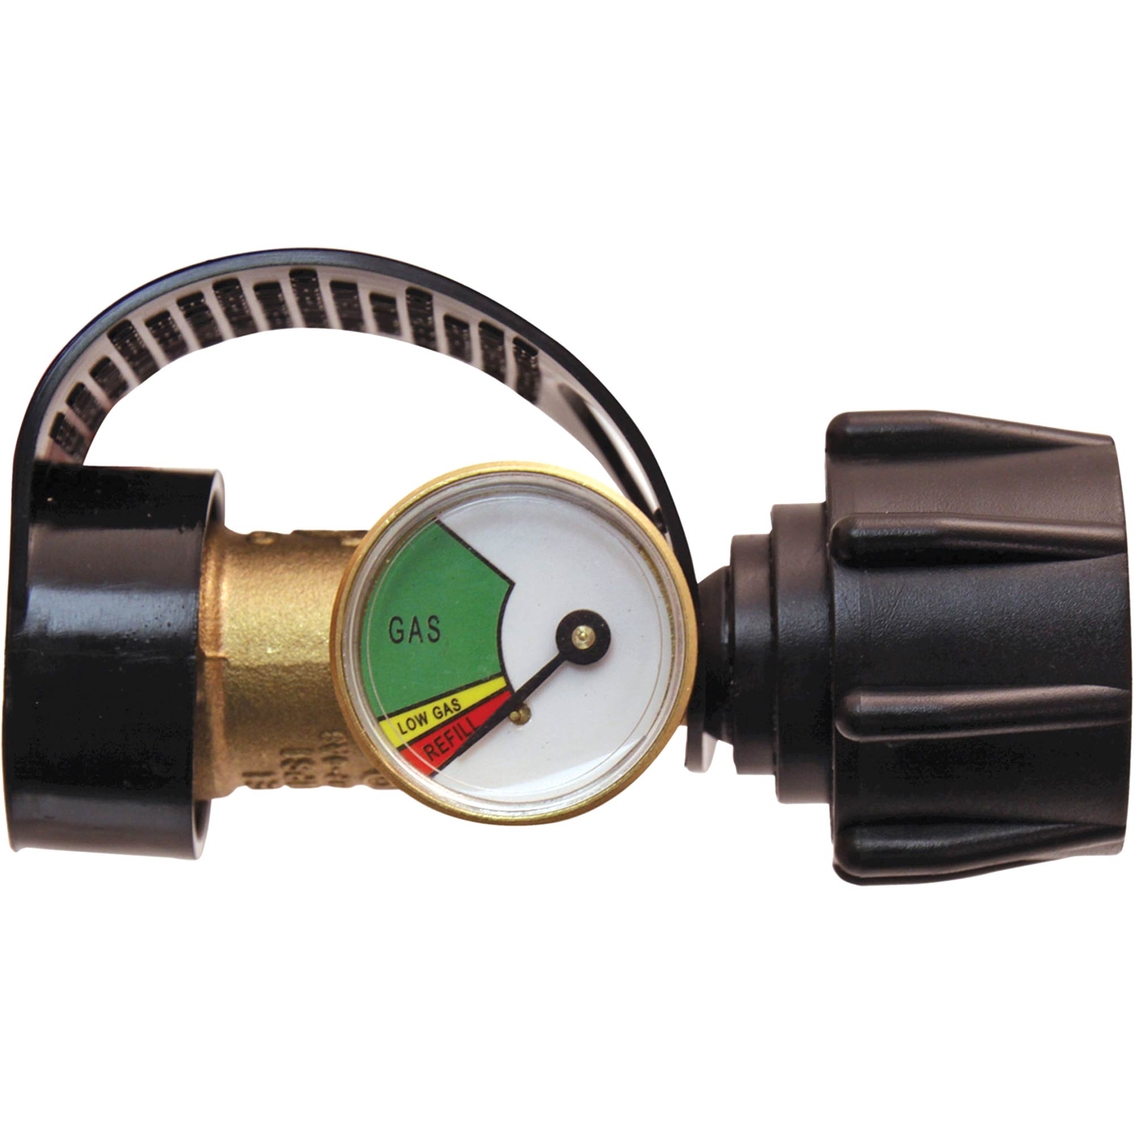 Char-Broil Universal Propane Tank Gauge X-large Fast No Tax for sale online 